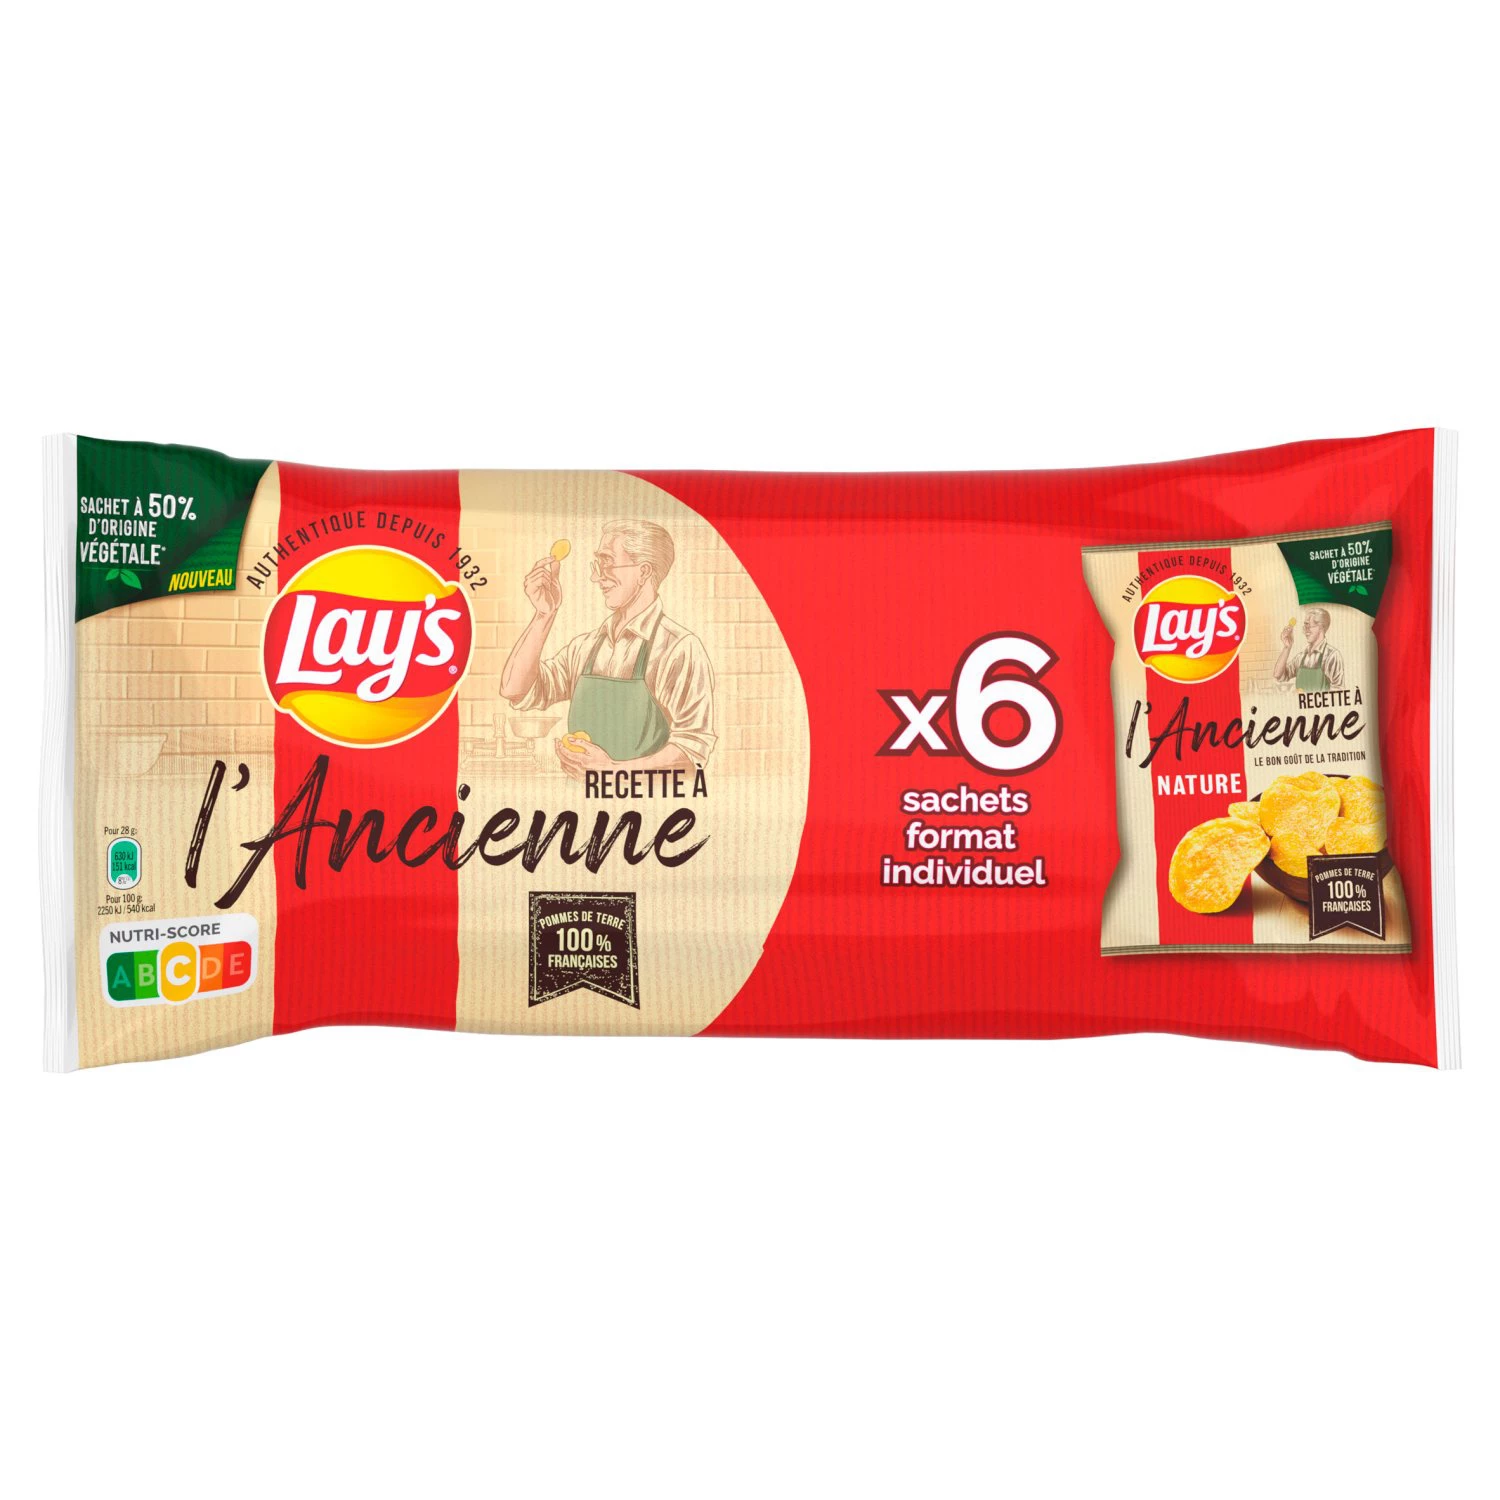 Oude Natuurchips, 28g -  LAY'S